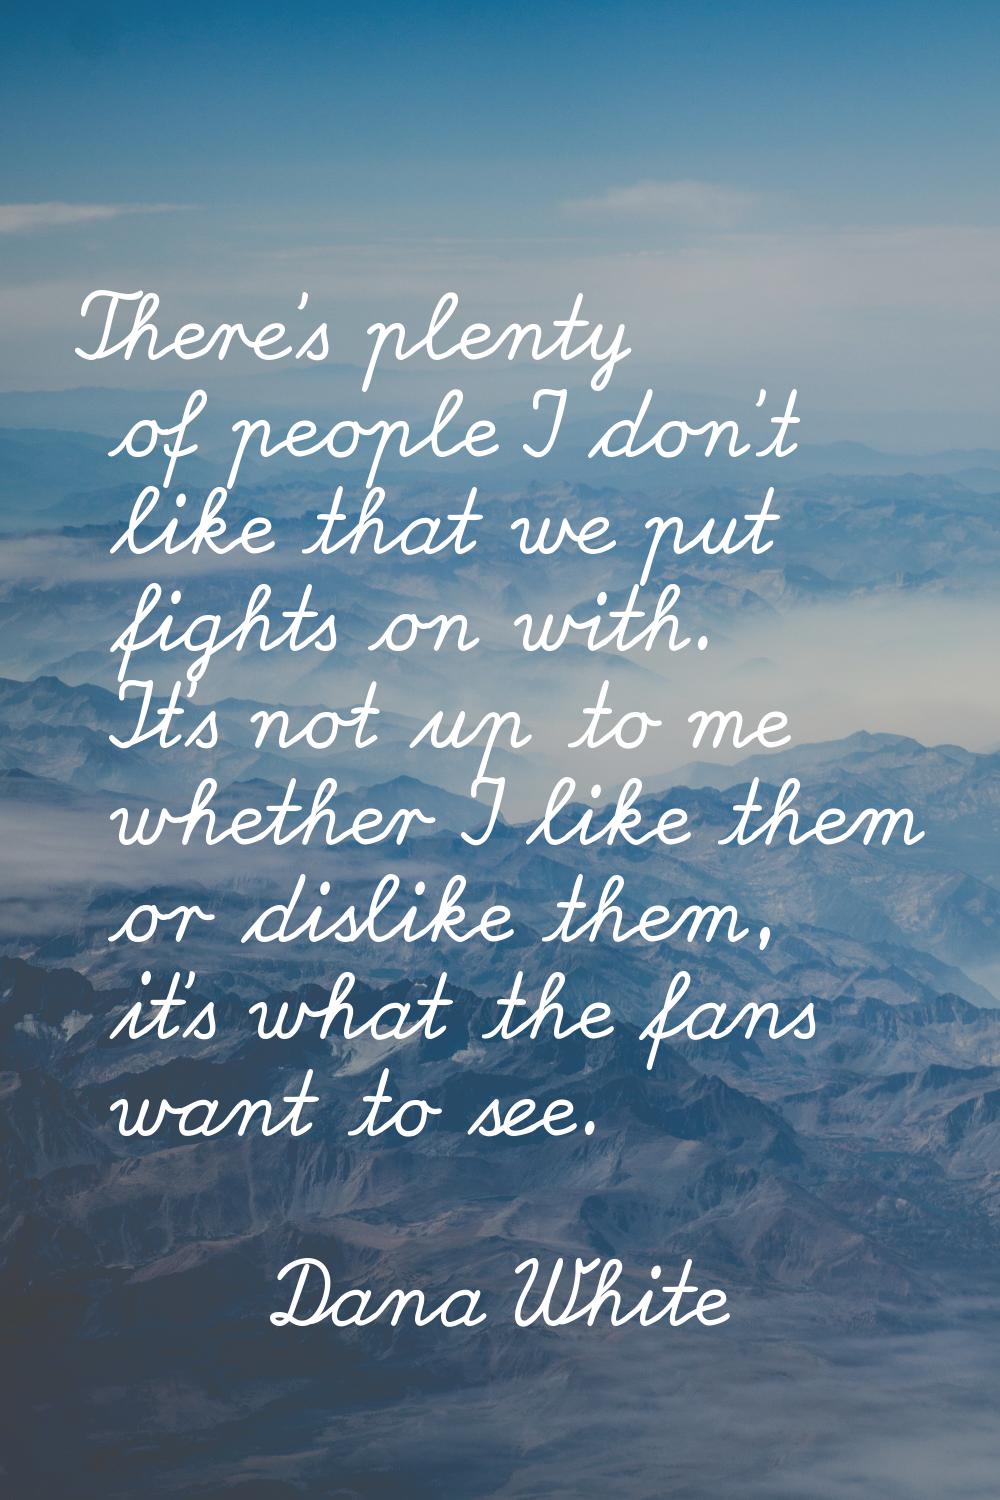 There's plenty of people I don't like that we put fights on with. It's not up to me whether I like 